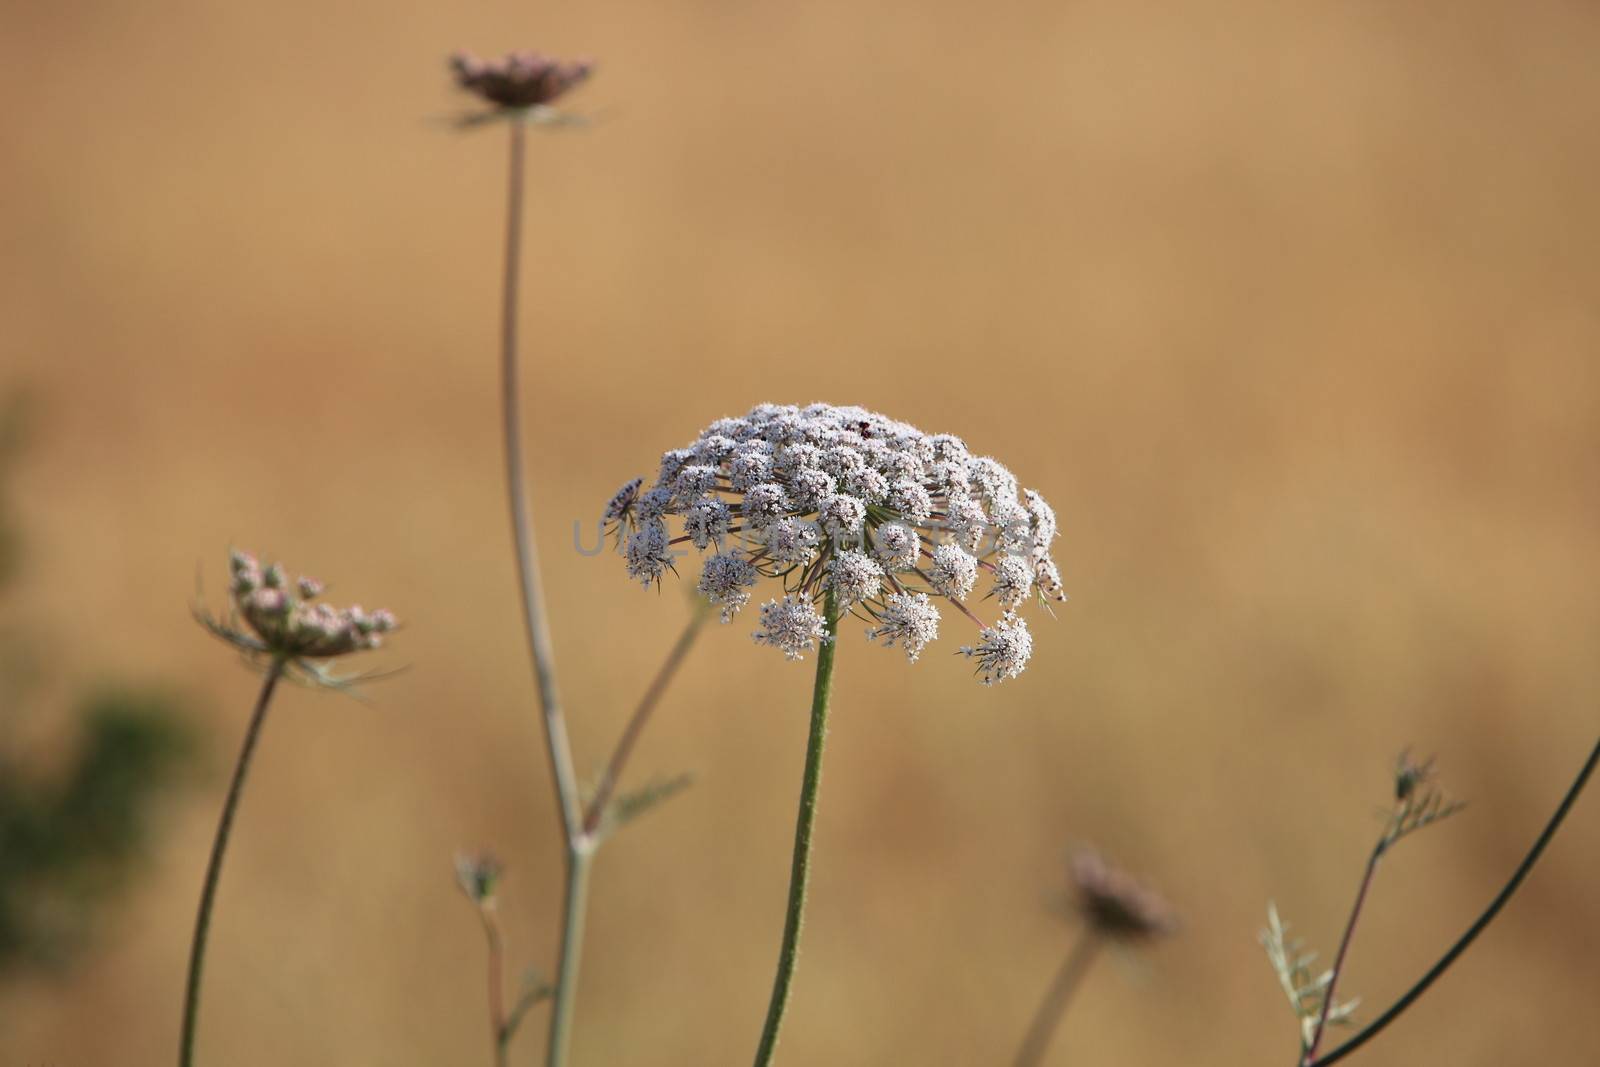 Queen Annes Lace, a common white wildflower that attracts insects in summer